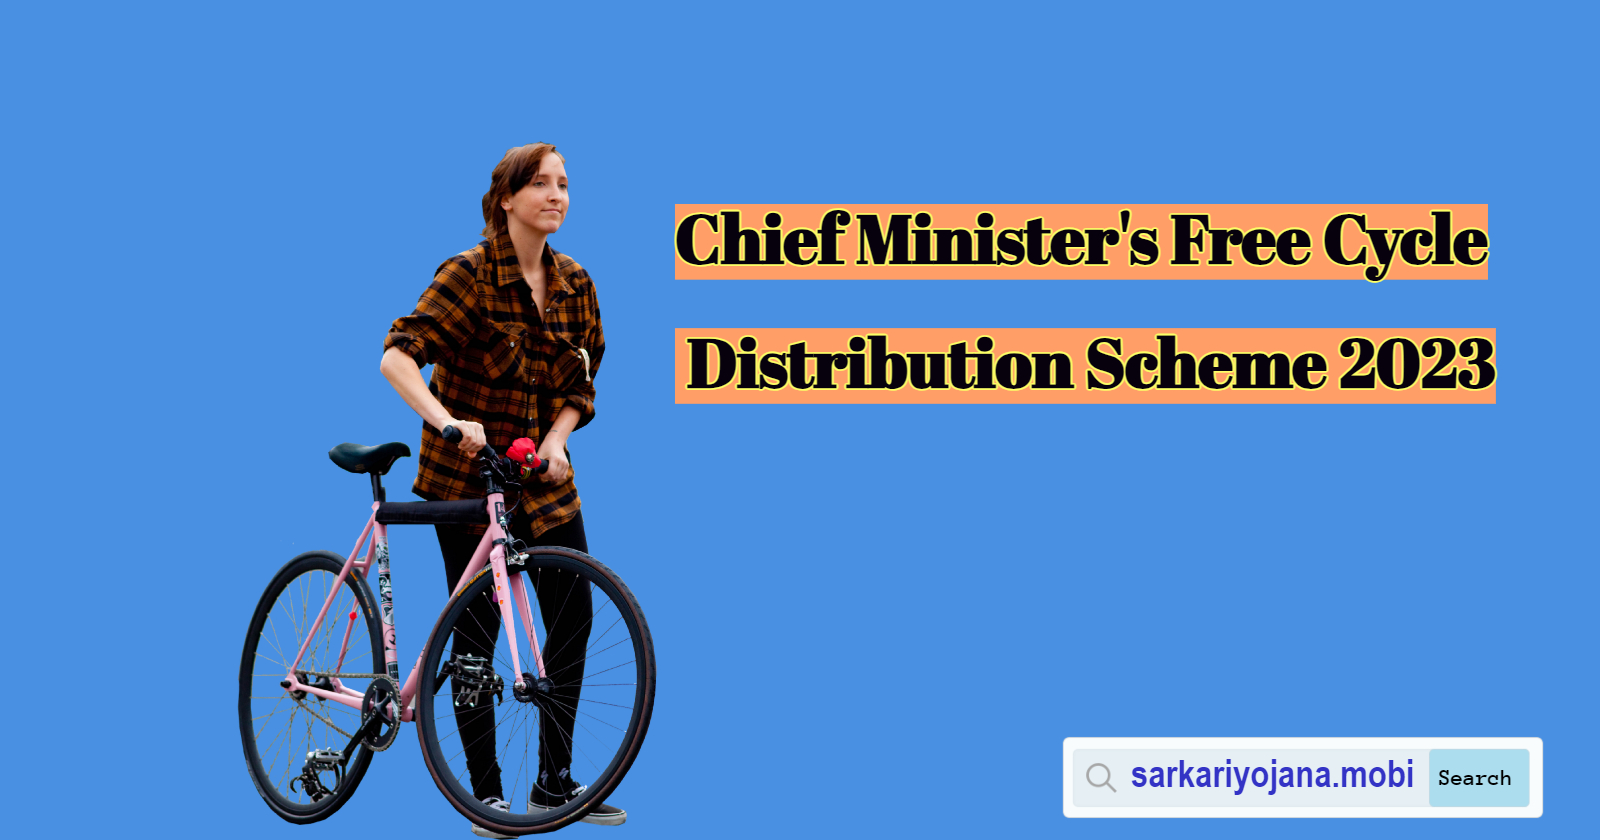 Chief Minister's Free Cycle Distribution Scheme 2023